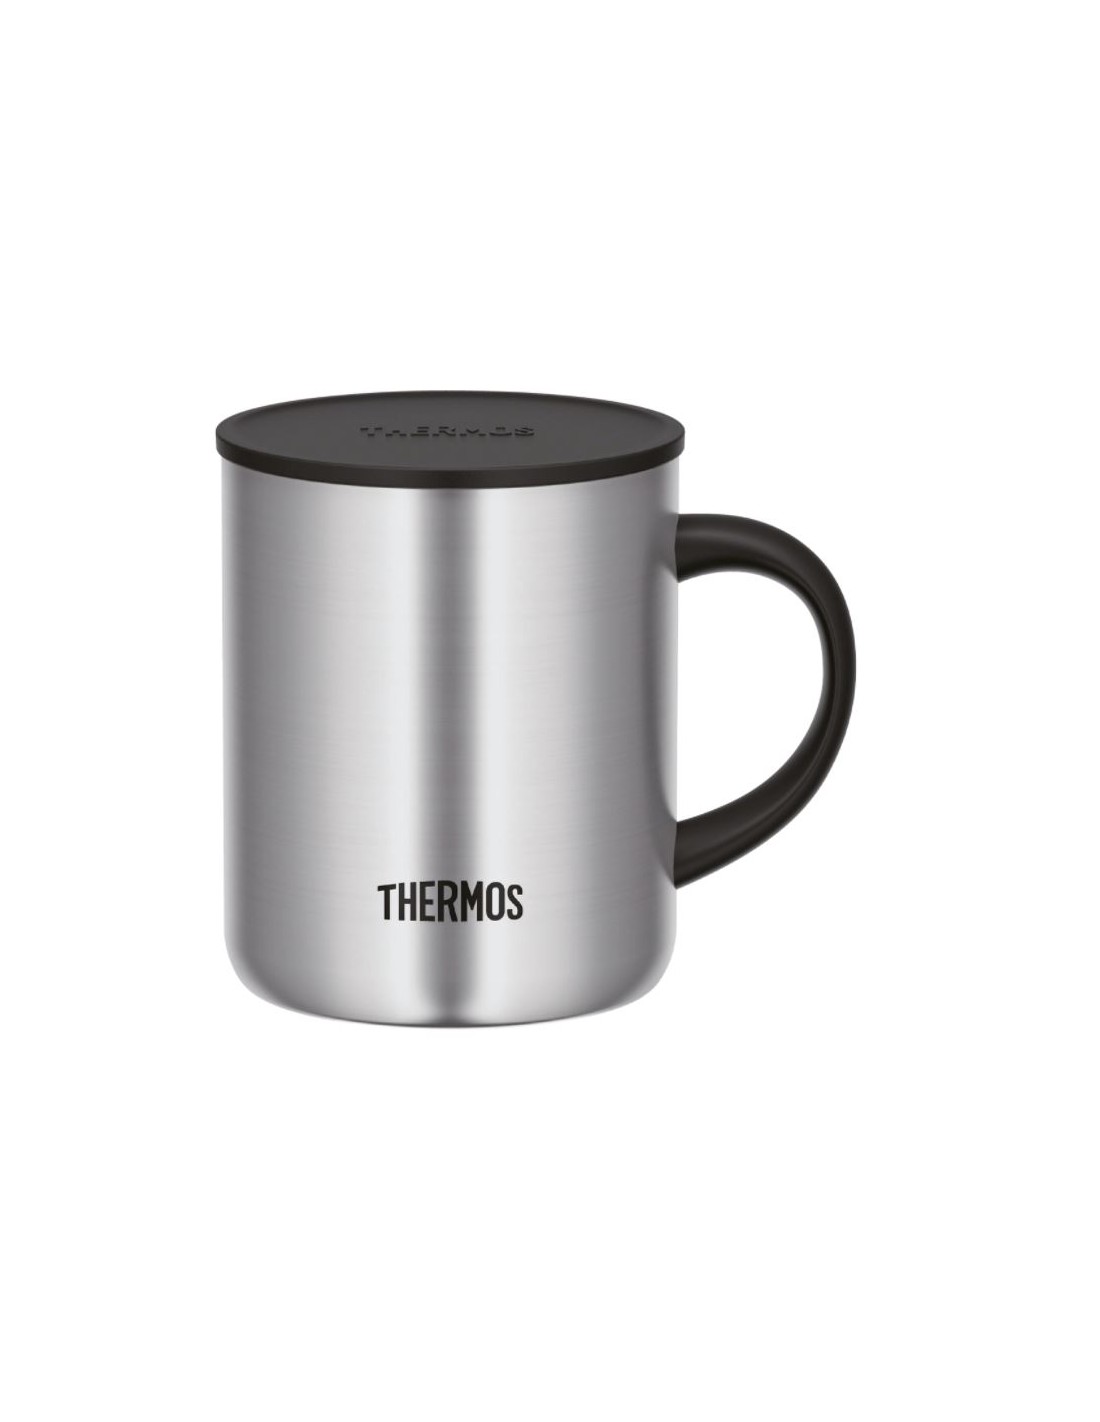 Thermos Isolierbecher Longlife Cup, stainless steel, 0,35 Liter von Thermos